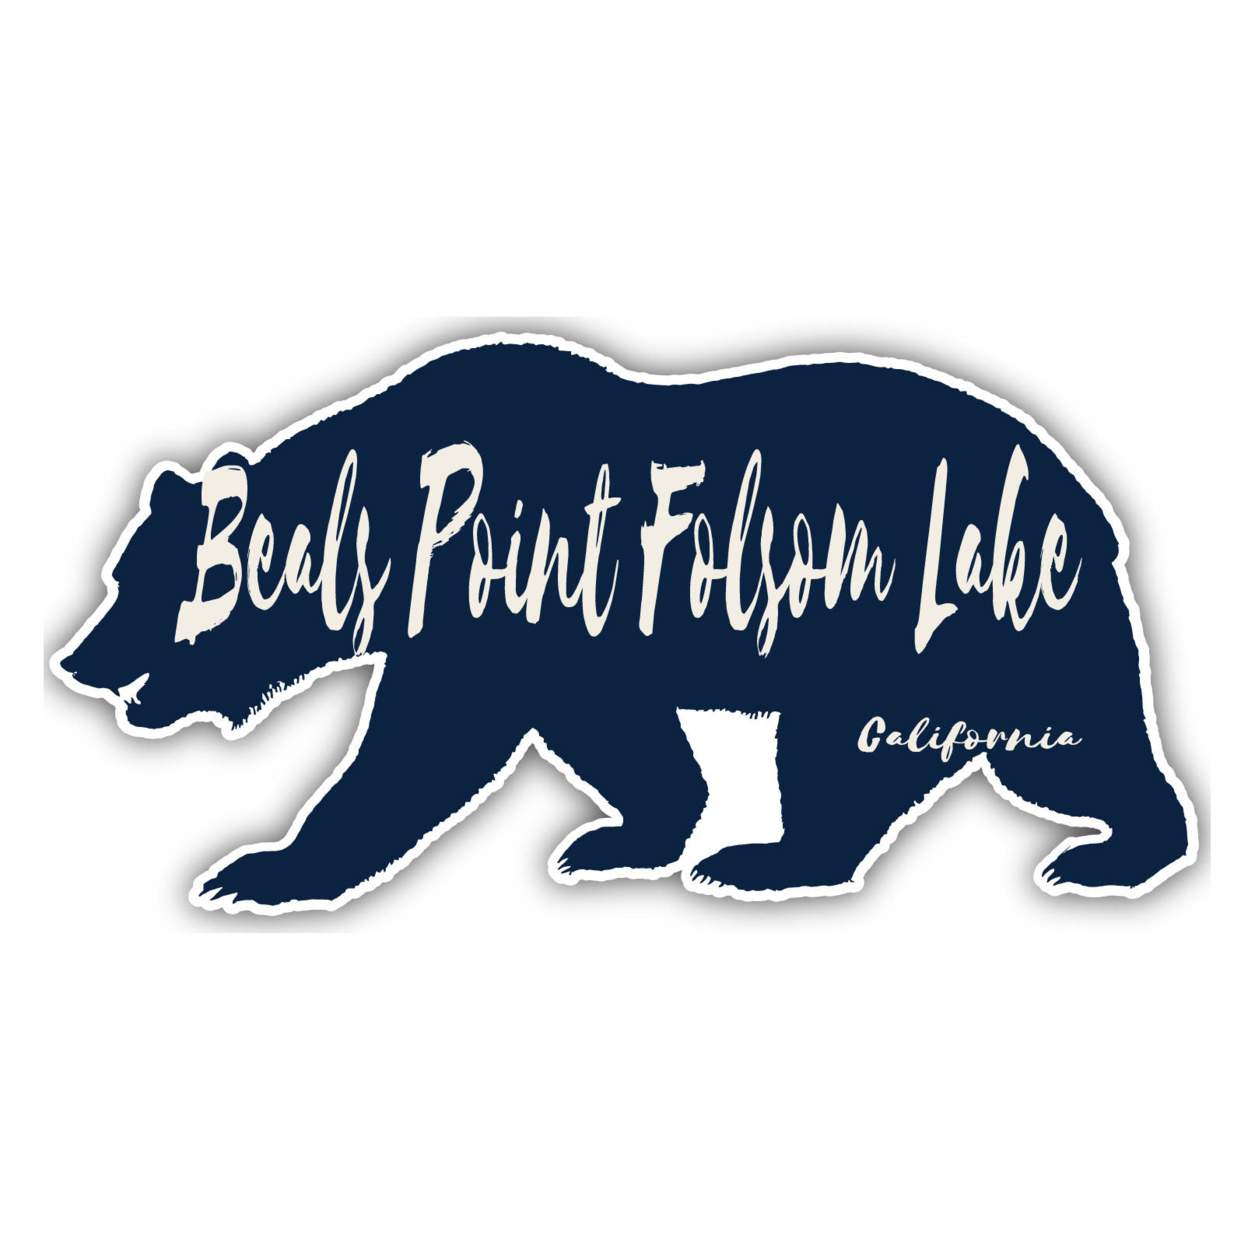 Beals Point Folsom Lake California Souvenir Decorative Stickers (Choose Theme And Size) - 4-Pack, 6-Inch, Tent